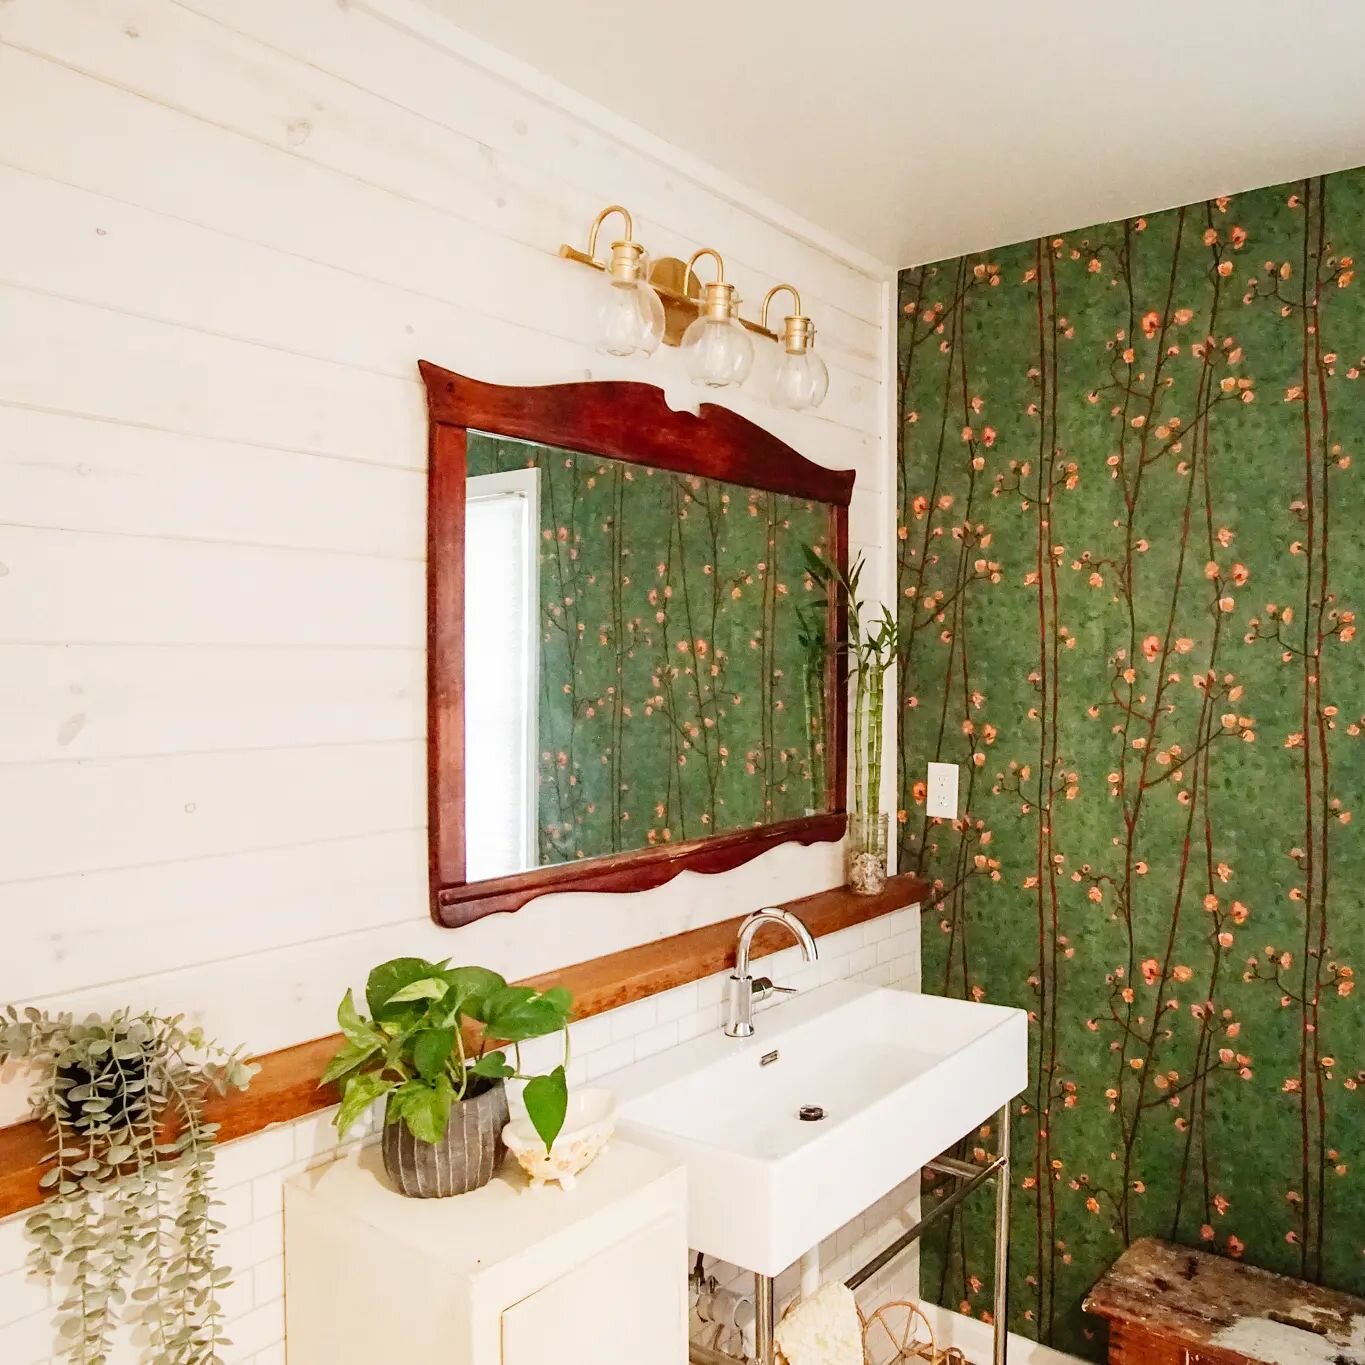 This ensuite bathroom is the right balance of eclectic and charming. White washed ship lap is paired with clean subway tile and gorgeous richly colored wallpaper. We love the vintage mirror, plants, and furniture against this backdrop. 

The owner is